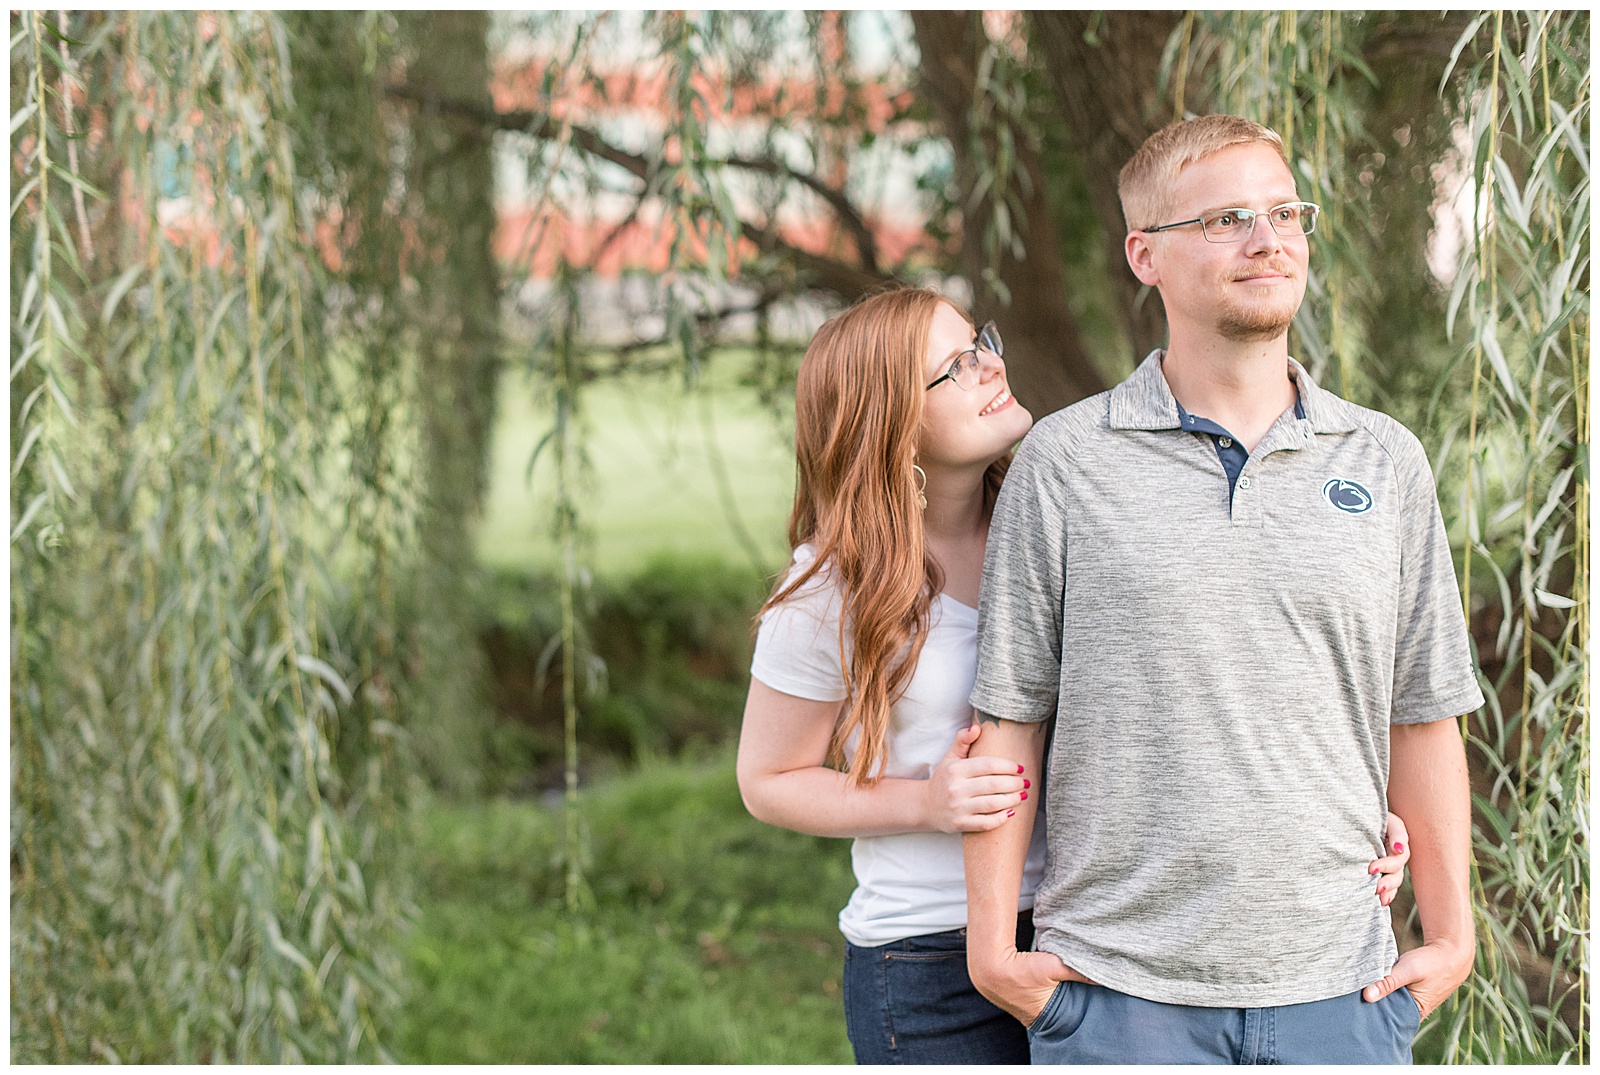 couple standing in front of willow tree with girl hugging guy from behind smiling at him as he smiles off to side